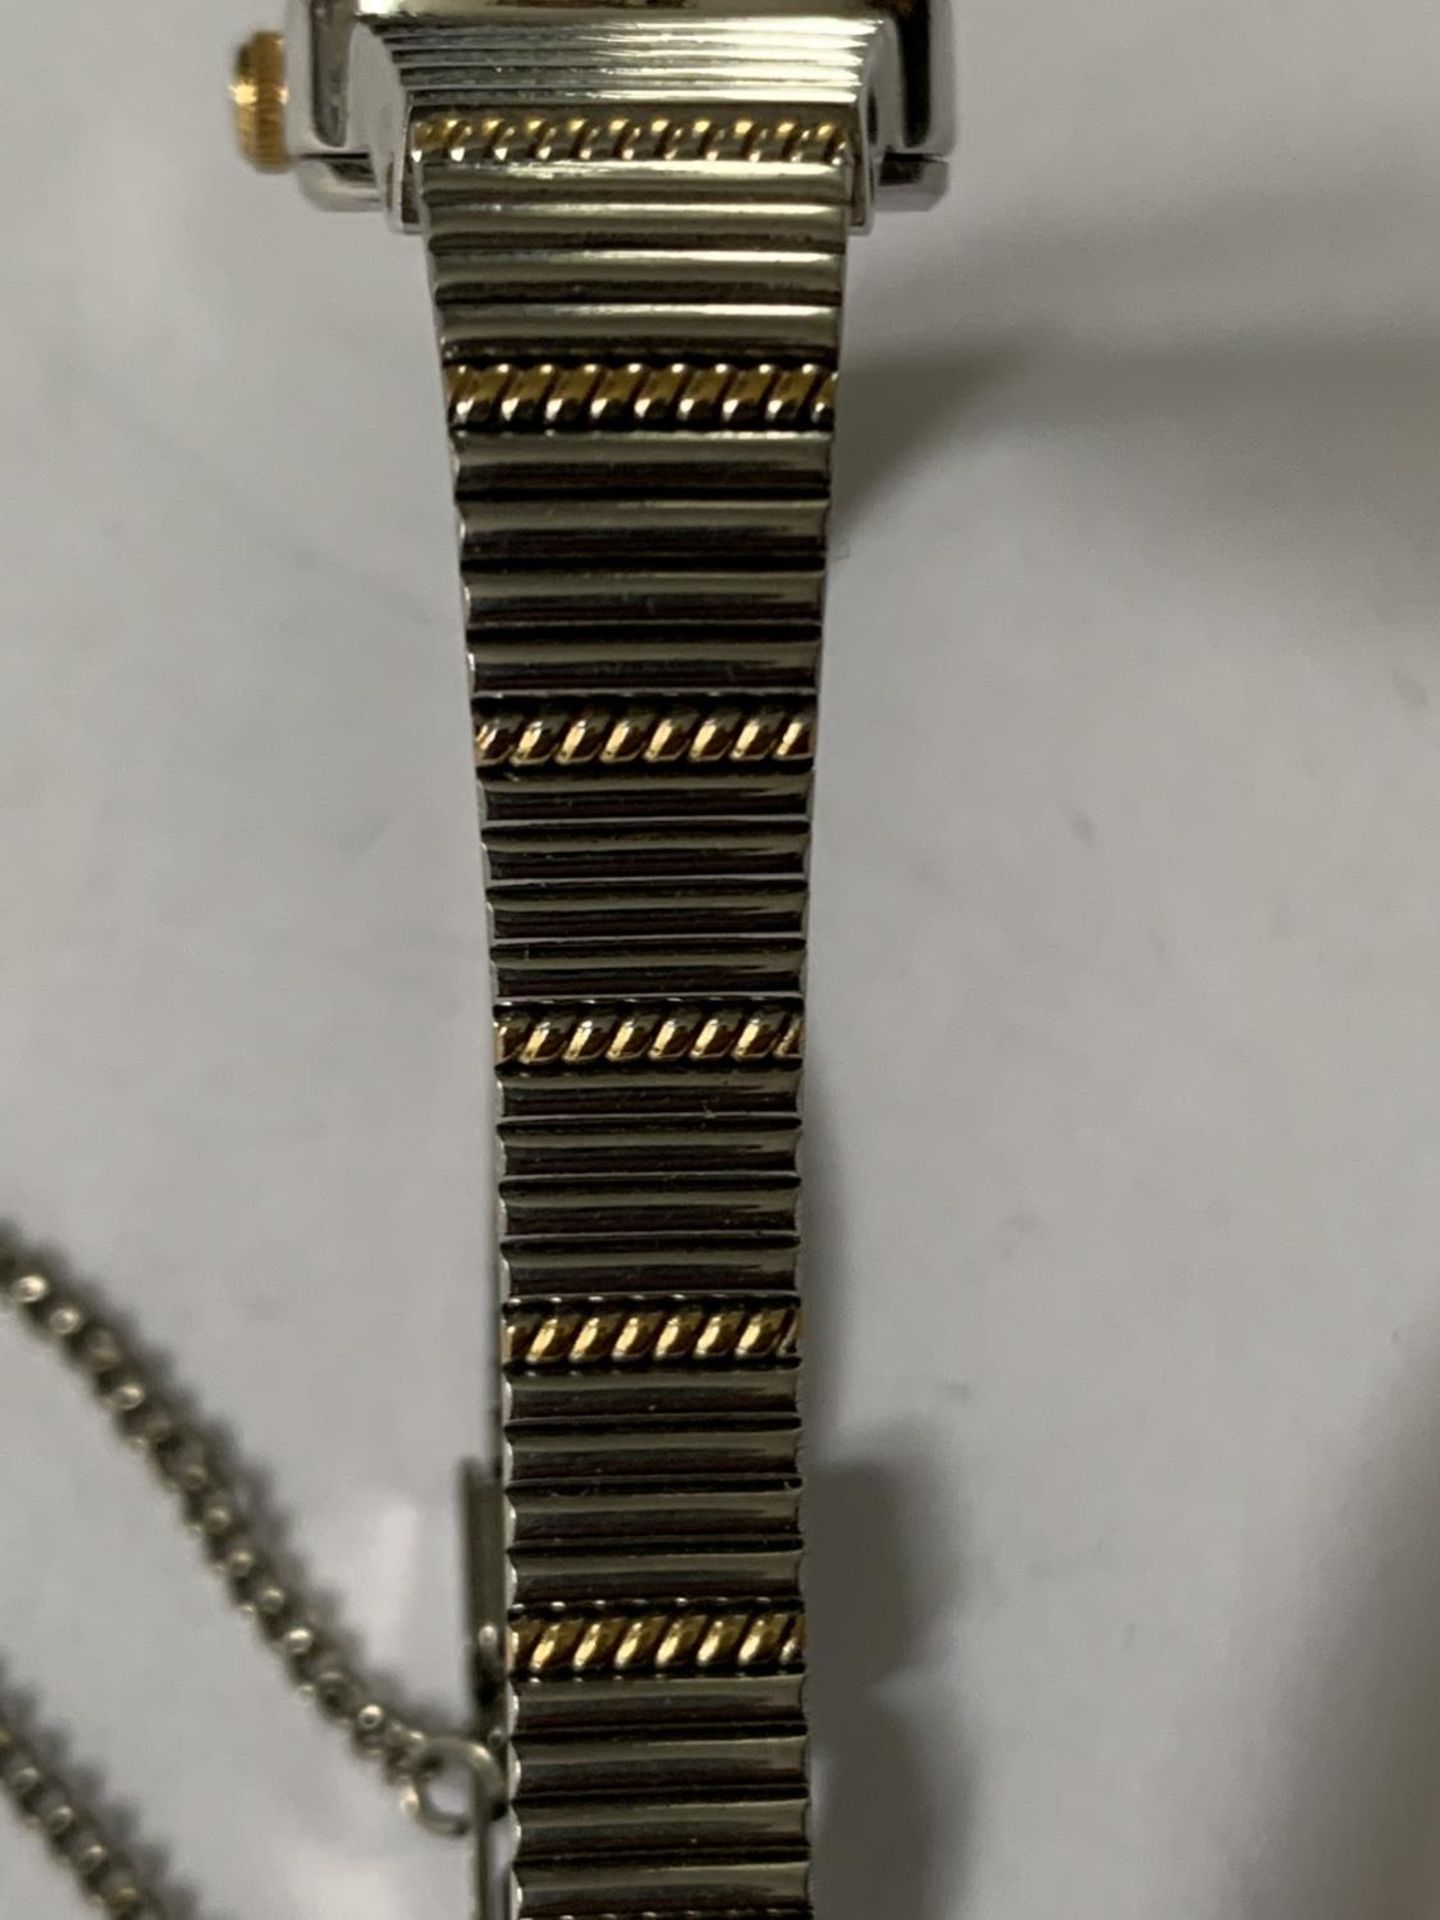 A ROTARY WHITE AND YELLOW METAL STRAP WRIST WATCH IN NEED OF BATTERY - Image 4 of 4